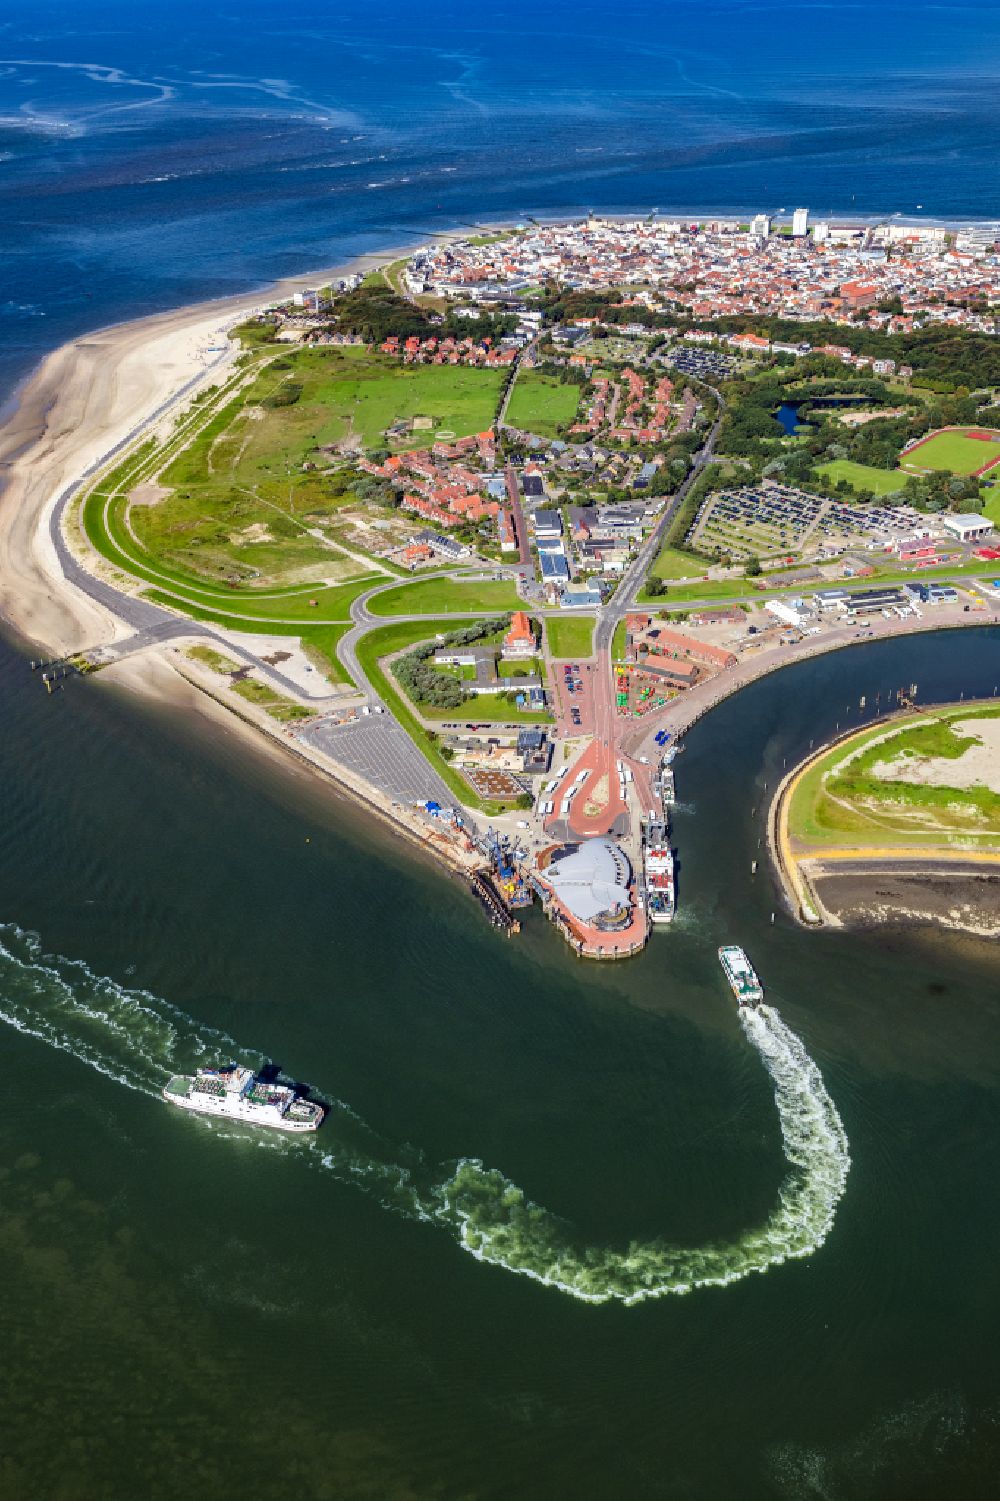 Norderney from the bird's eye view: Ferry port facilities on the sea coast of the North Sea island Norderney in the state Lower Saxony, Germany